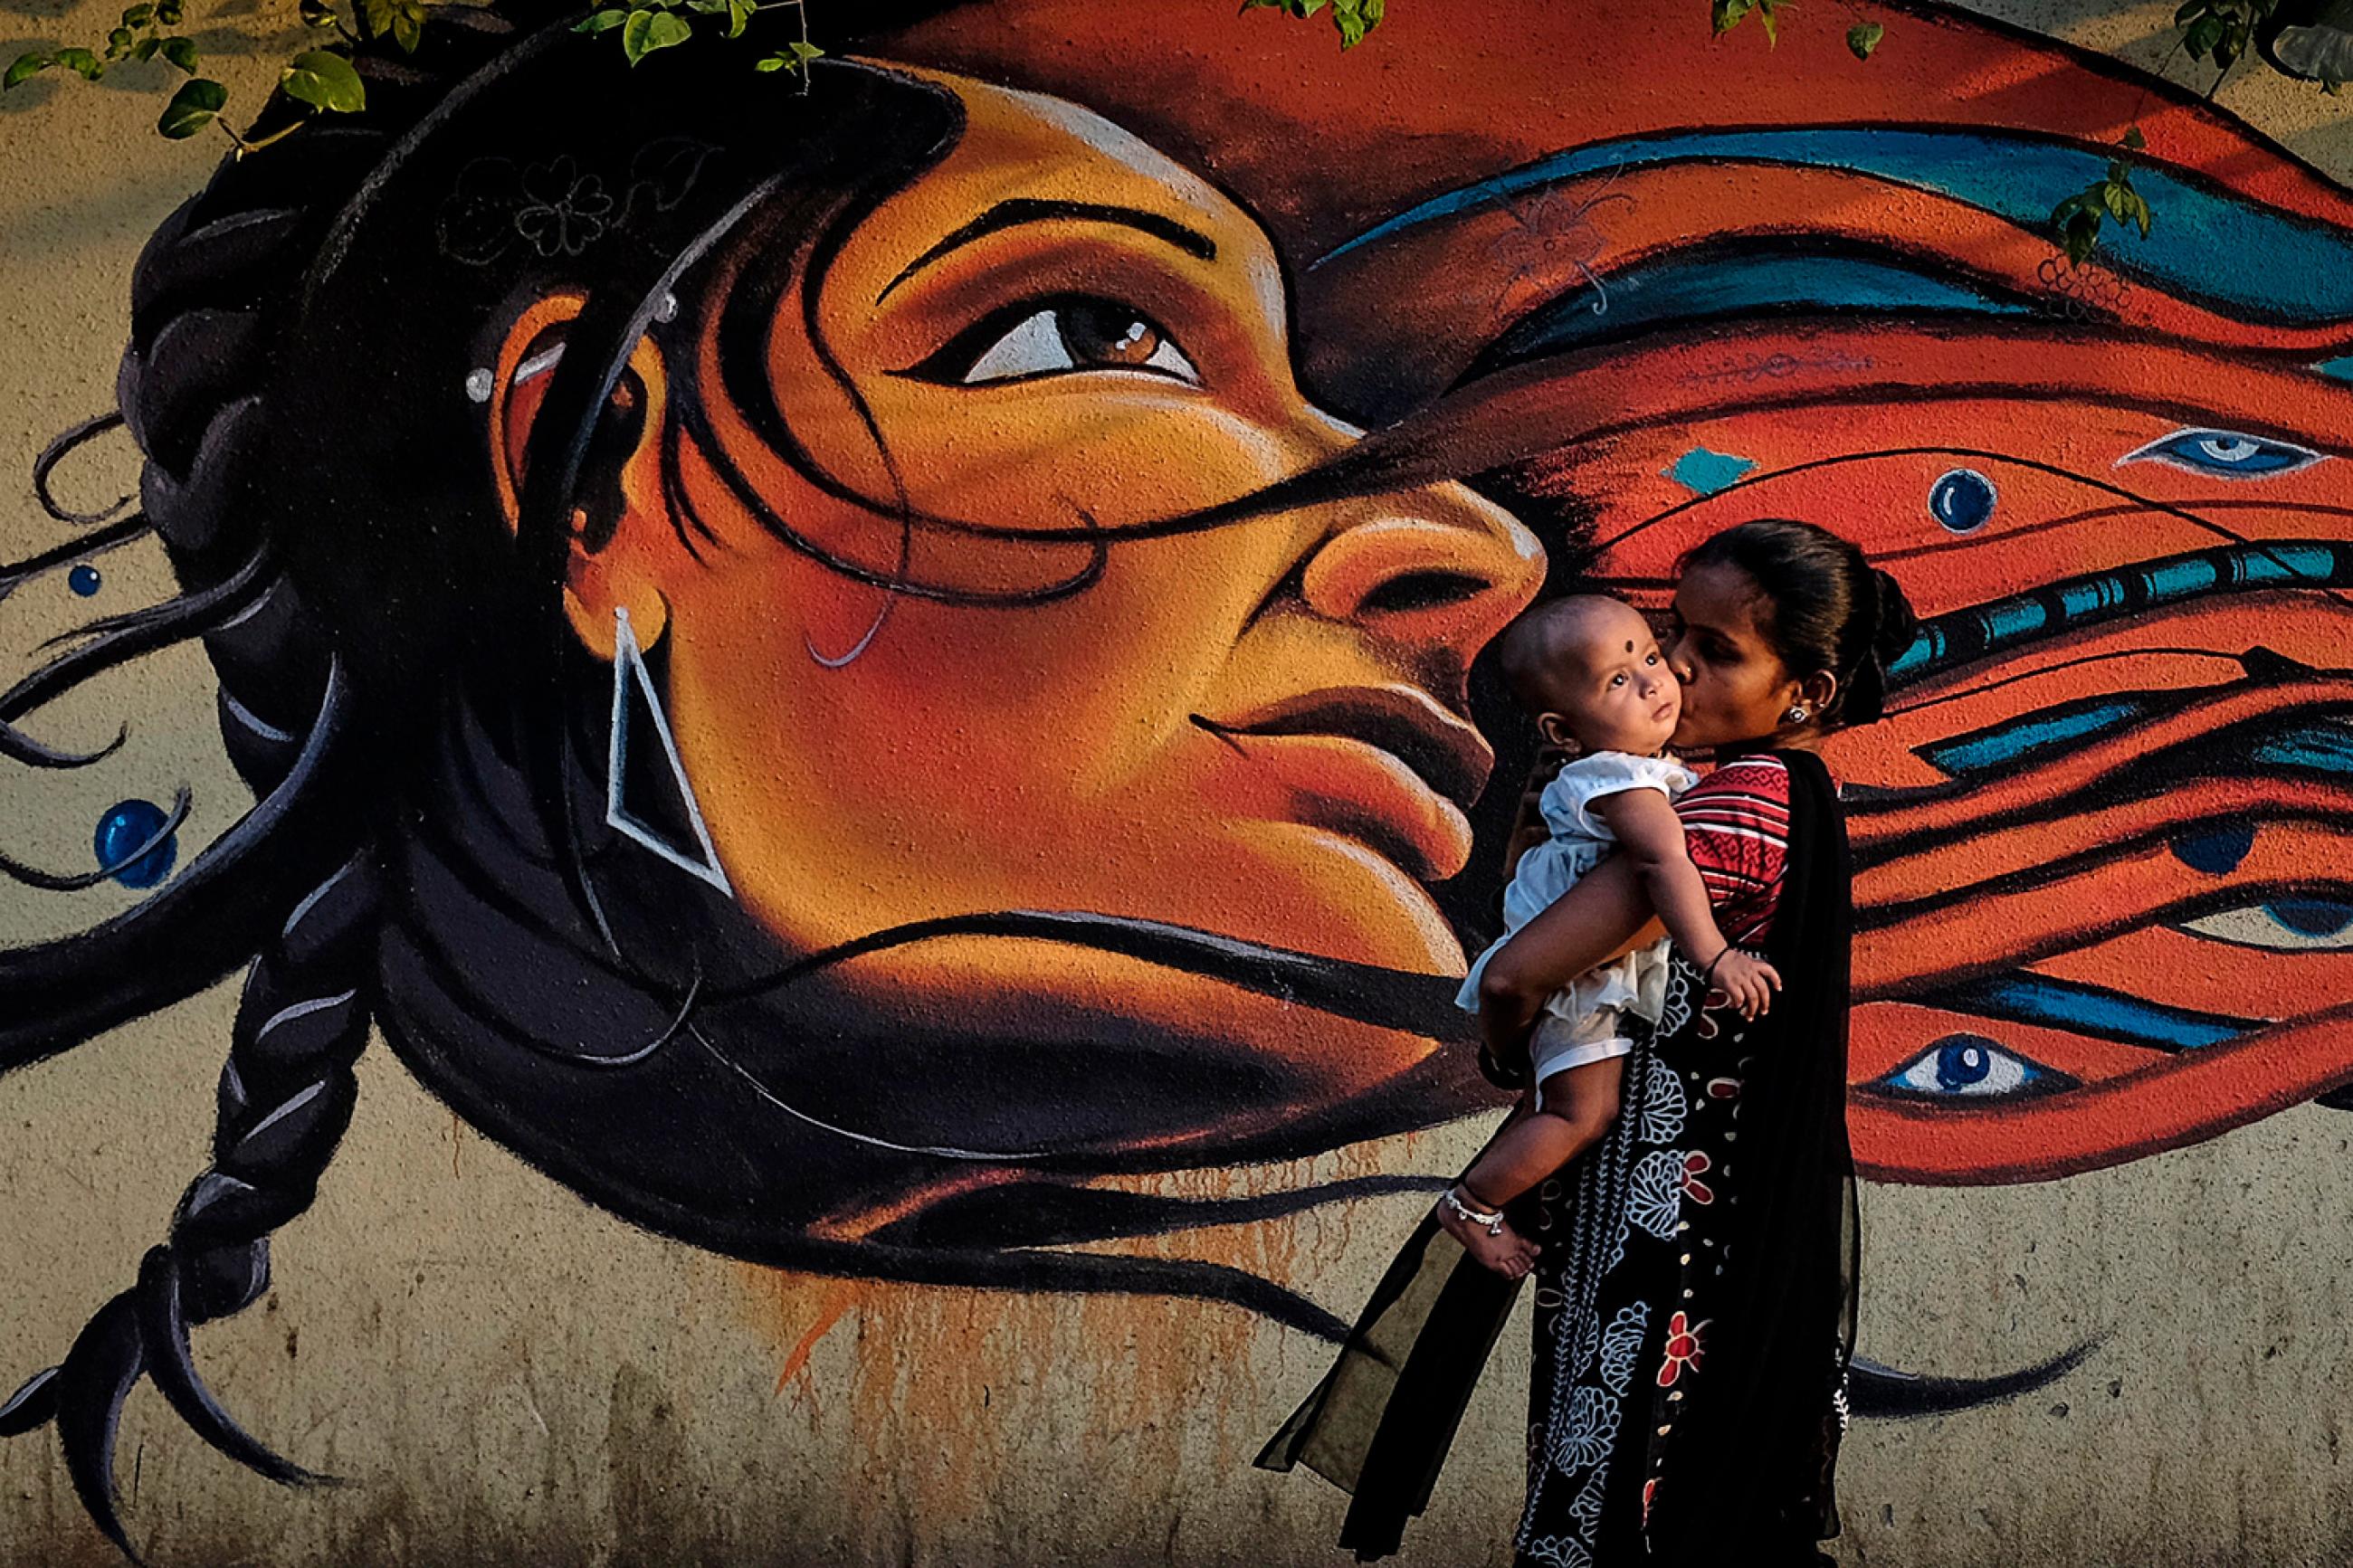 A mother kisses her child as she walks past graffiti in Mumbai on March 27, 2014. The image is striking with a large, artistic image behind a woman who is walking and holding a child. REUTERS/Danish Siddiqui